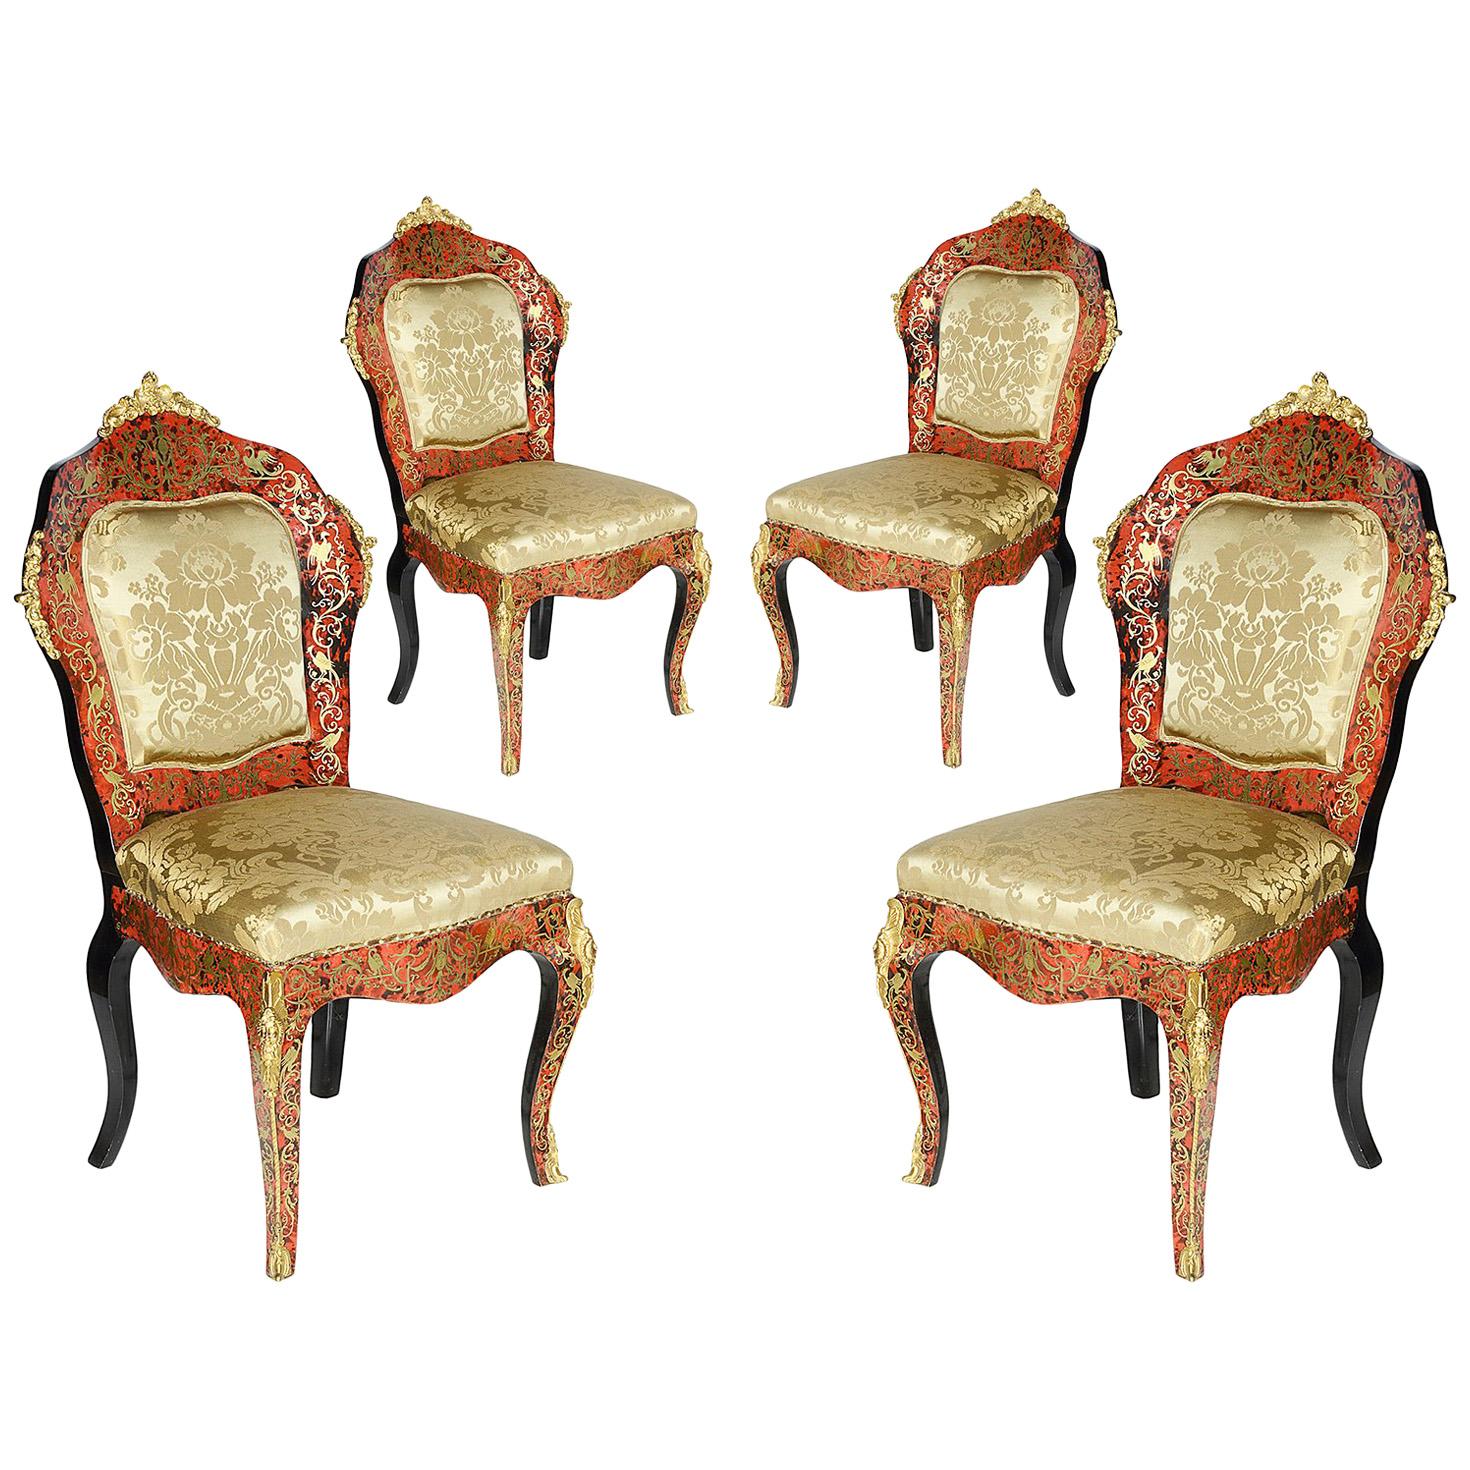 Rare Set of Four Boulle Side Chairs, 19th Century